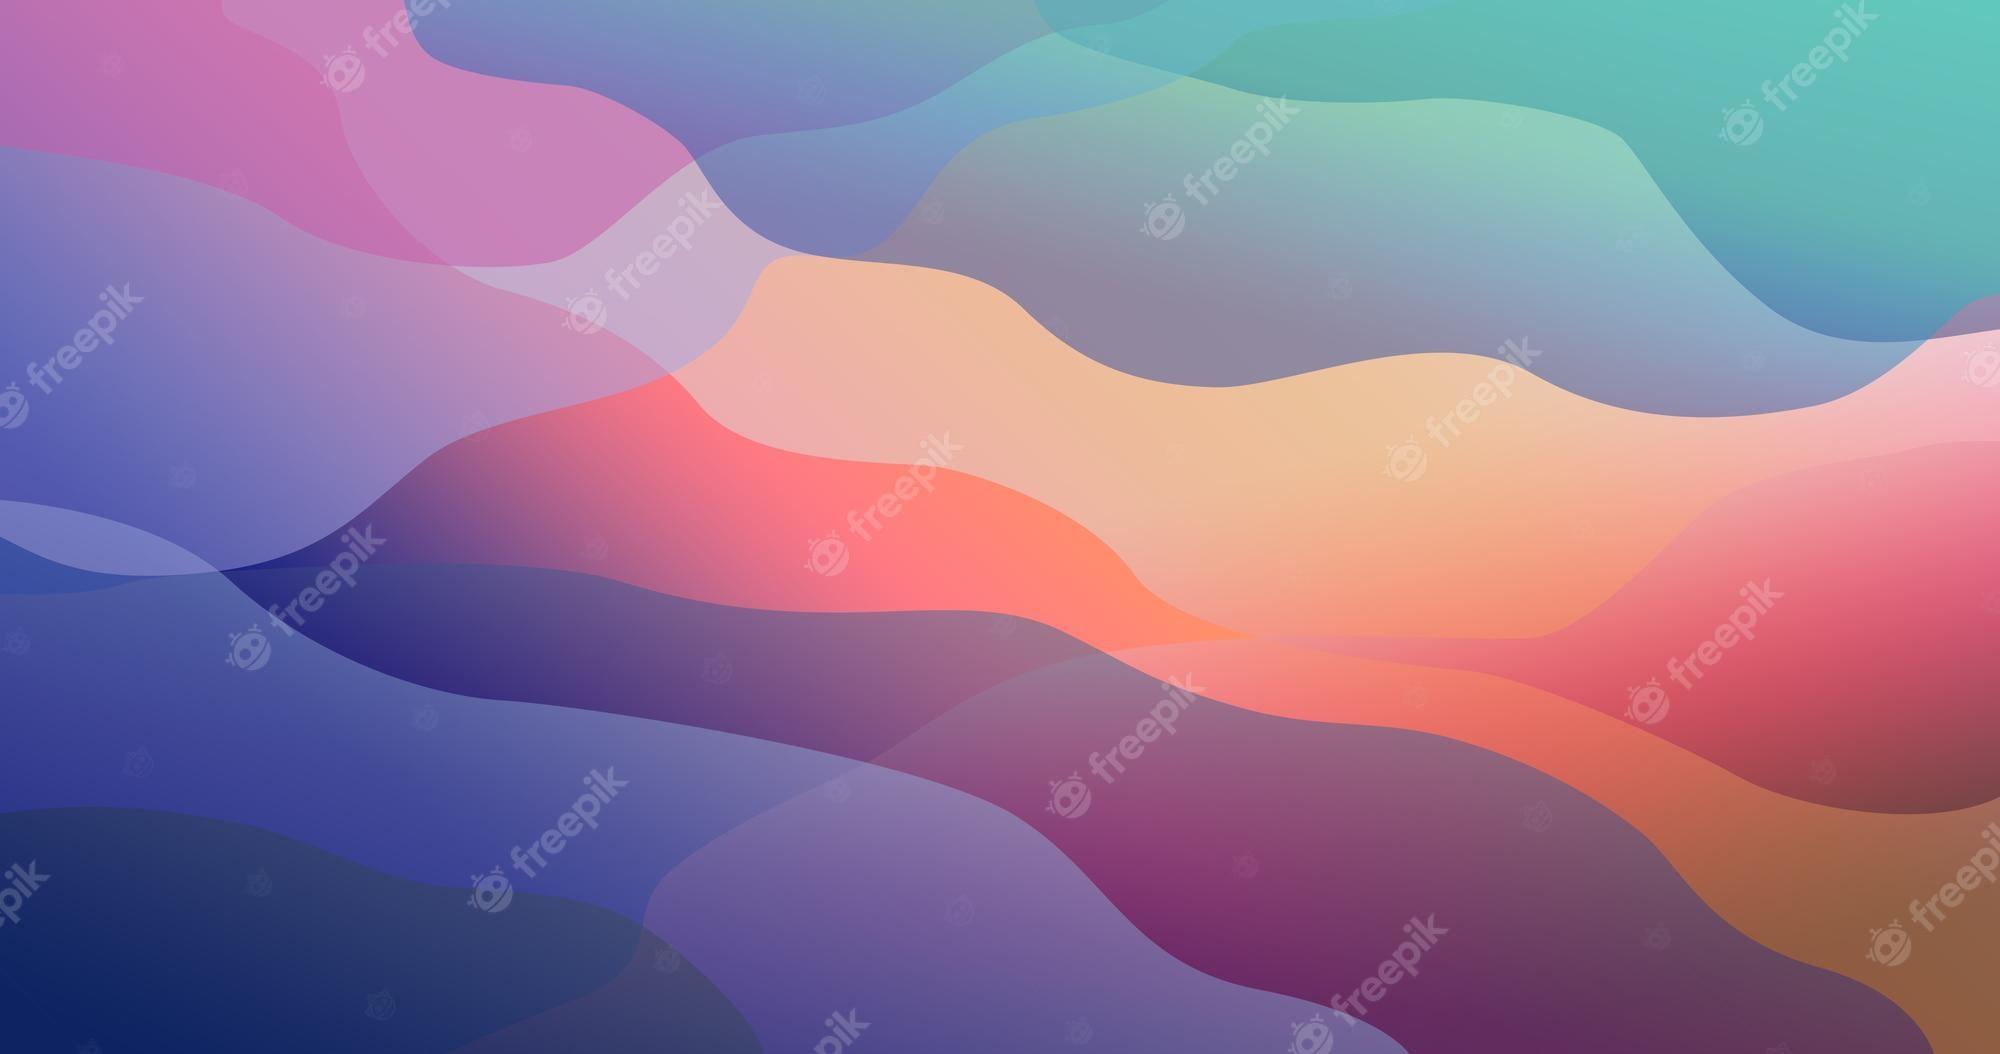 Premium Psd Abstract Colorful Gradient Background Modern